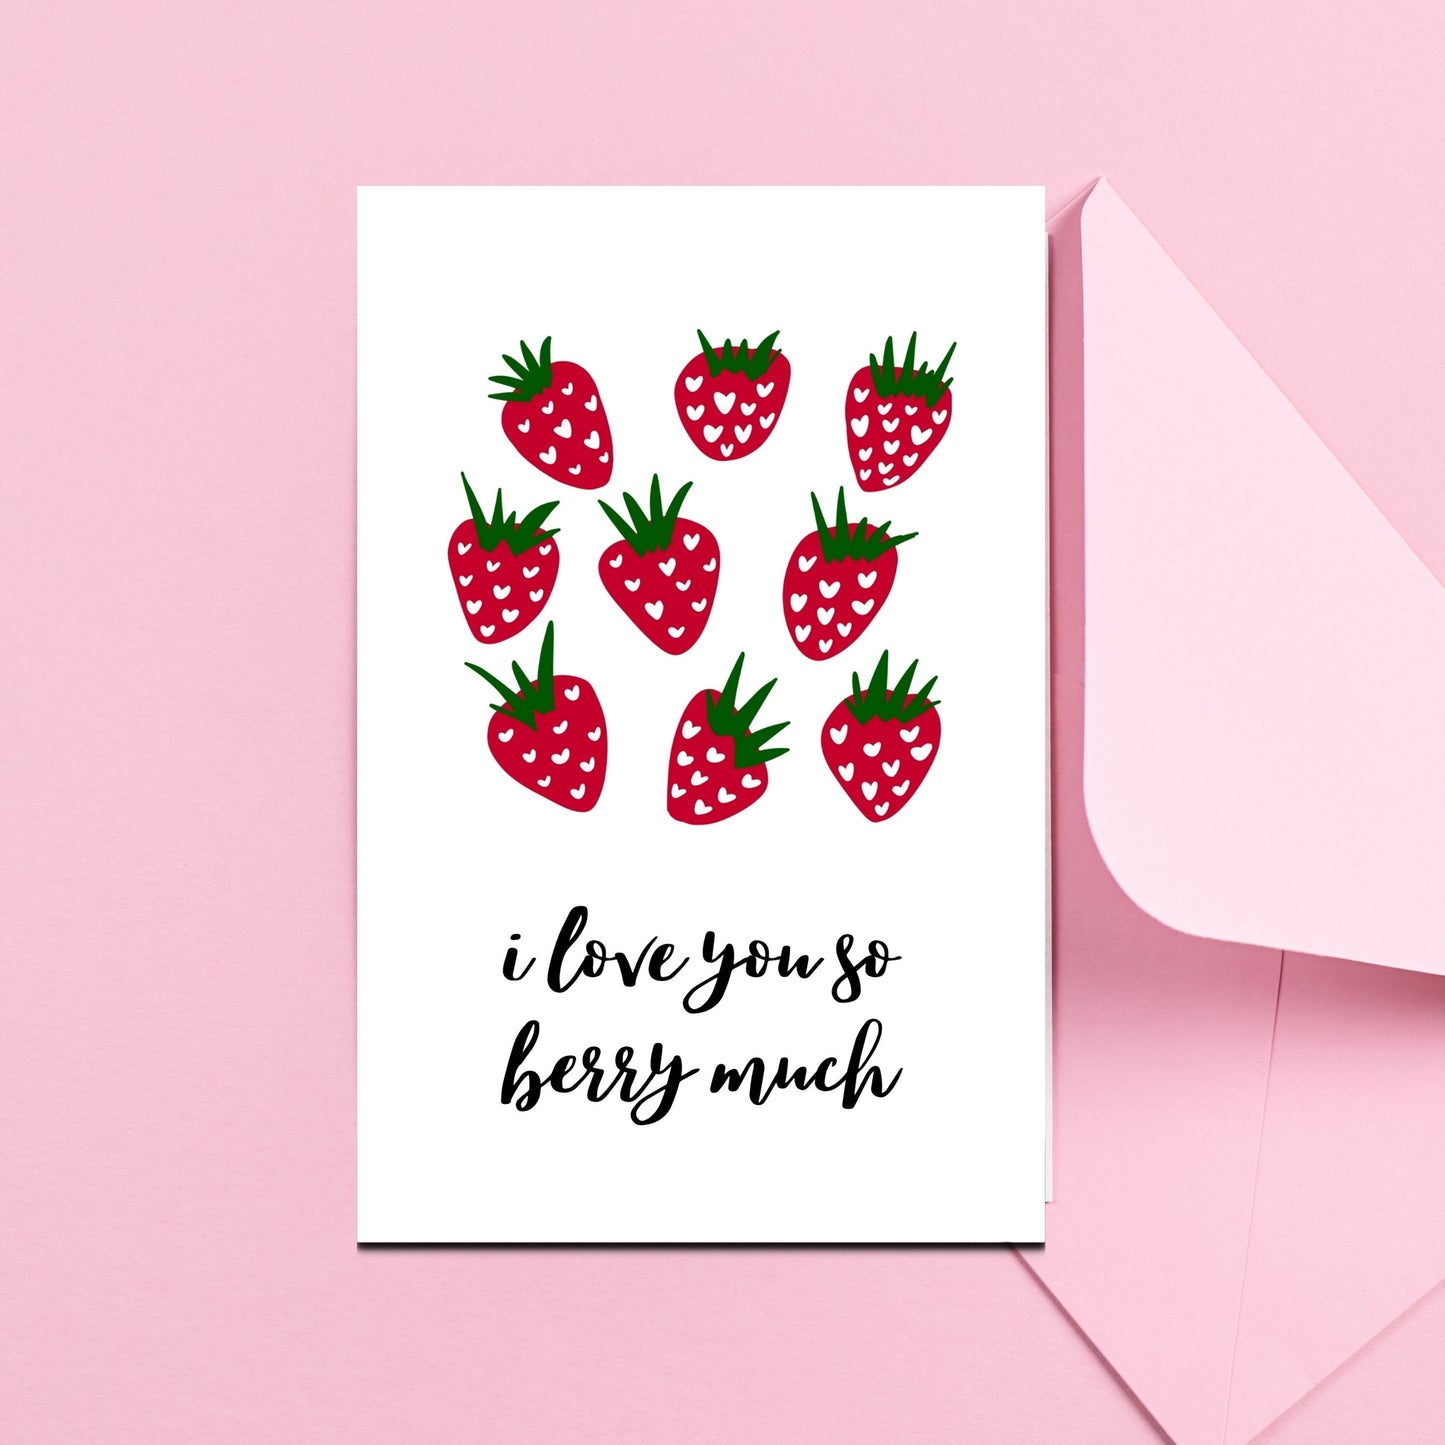 I Love You Berry Much Valentine's Day Greeting Card, Happy Cute Strawberry, Happy Face, Berry Pun, Punny Card, Handmade,